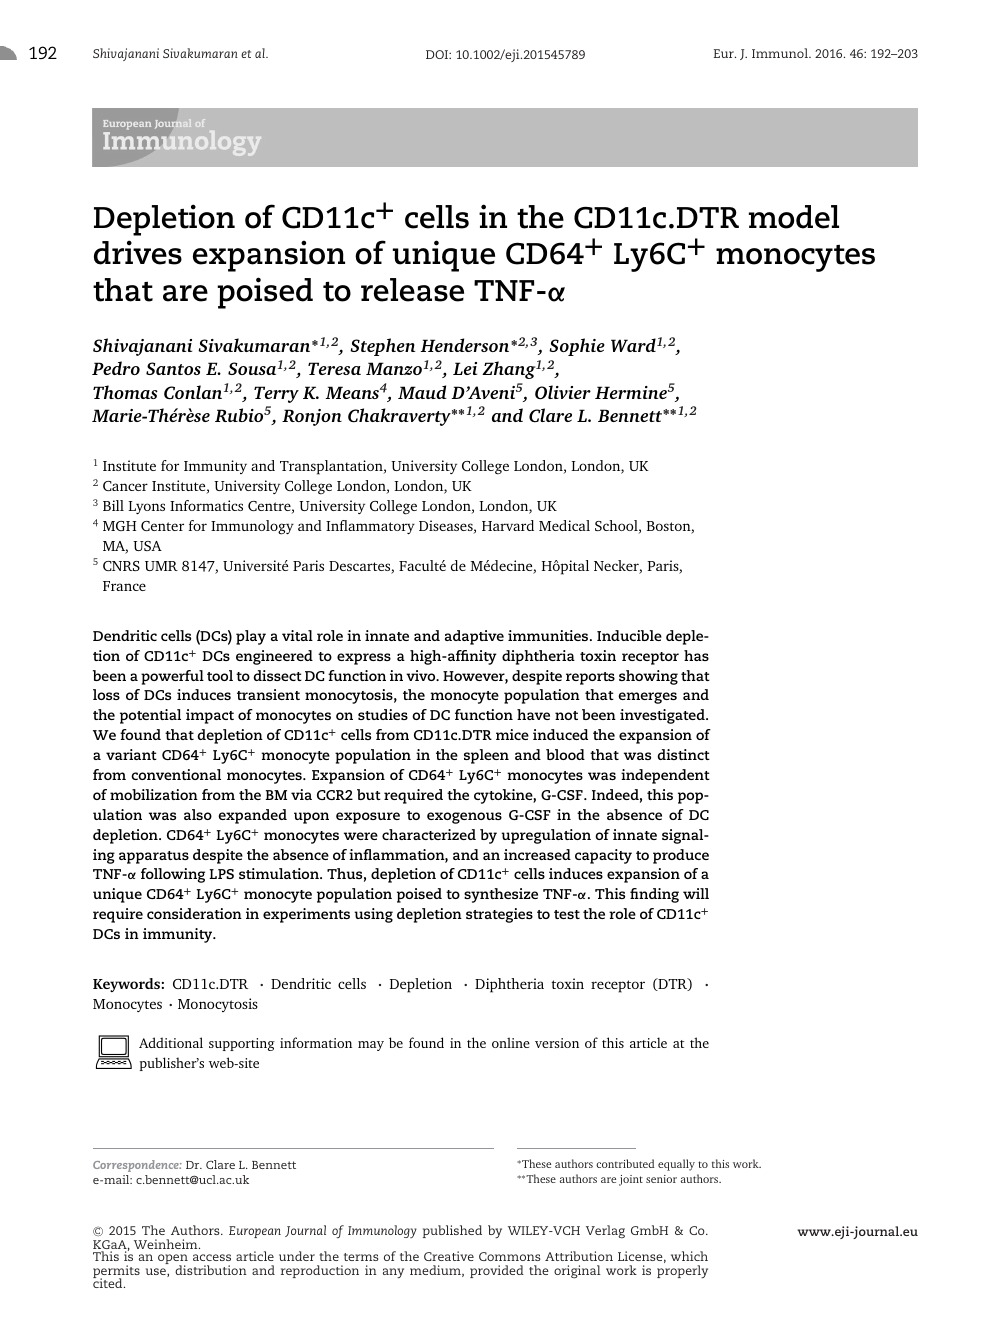 Depletion Of Cd11c Cells In The Cd11c Dtr Model Drives Expansion Of Unique Cd64 Ly6c Monocytes That Are Poised To Release Tnf A Topic Of Research Paper In Biological Sciences